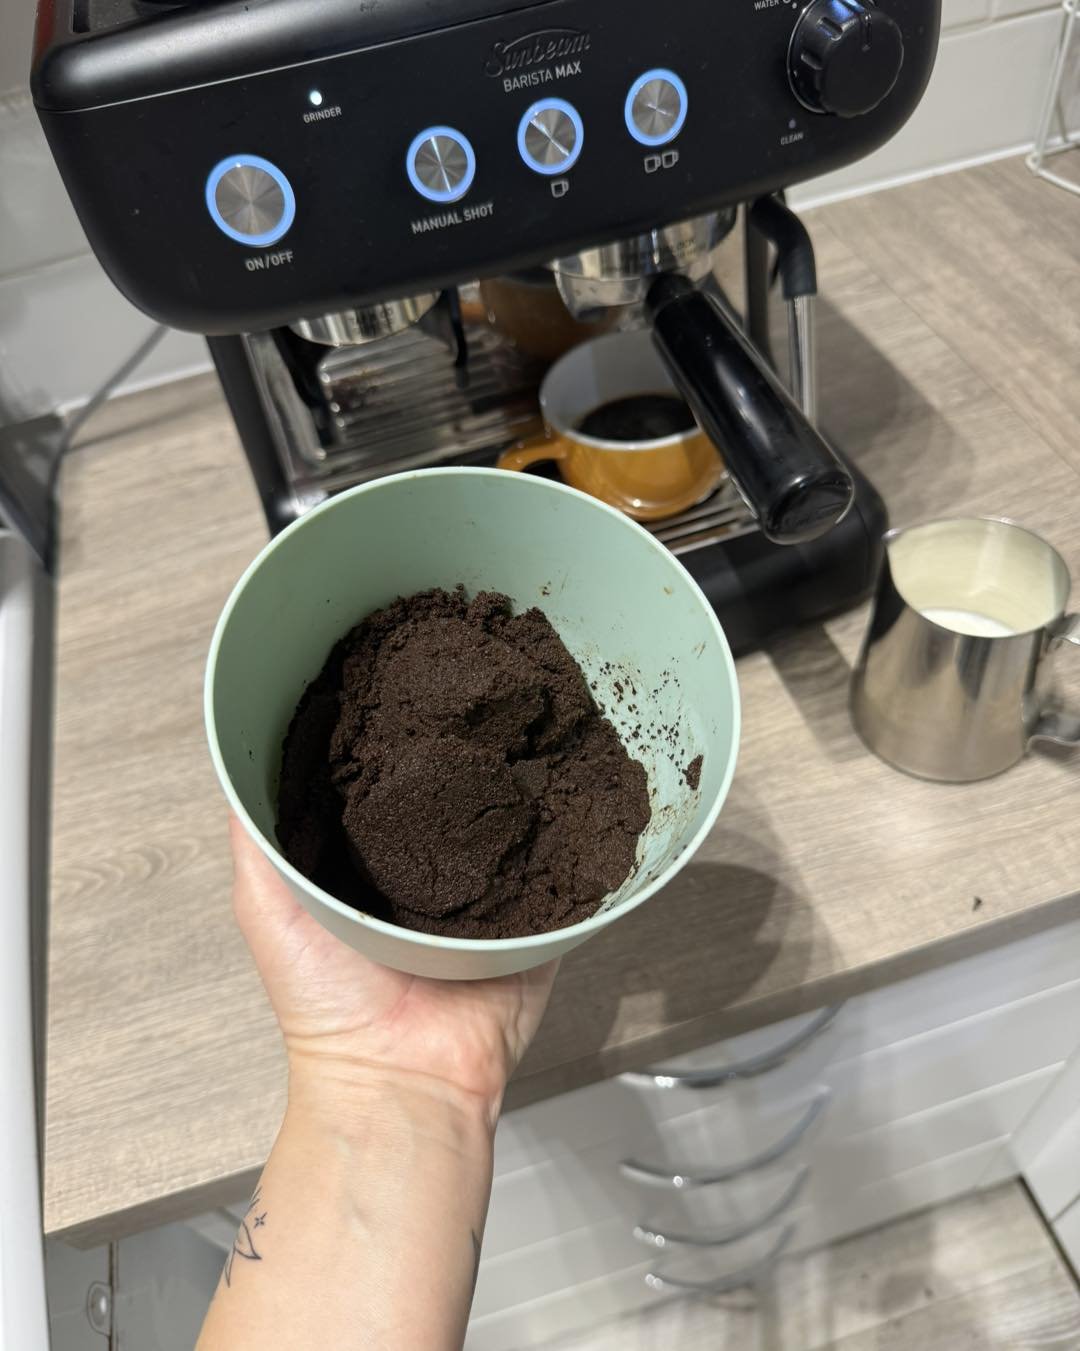 As we use real coffee beans for the coffee in our Salon, we have a lot of ground coffee that gets disposed in the bin every day.

Coffee beans are fantastic for the garden so I&rsquo;m just putting it out there for anyone who would like them every we